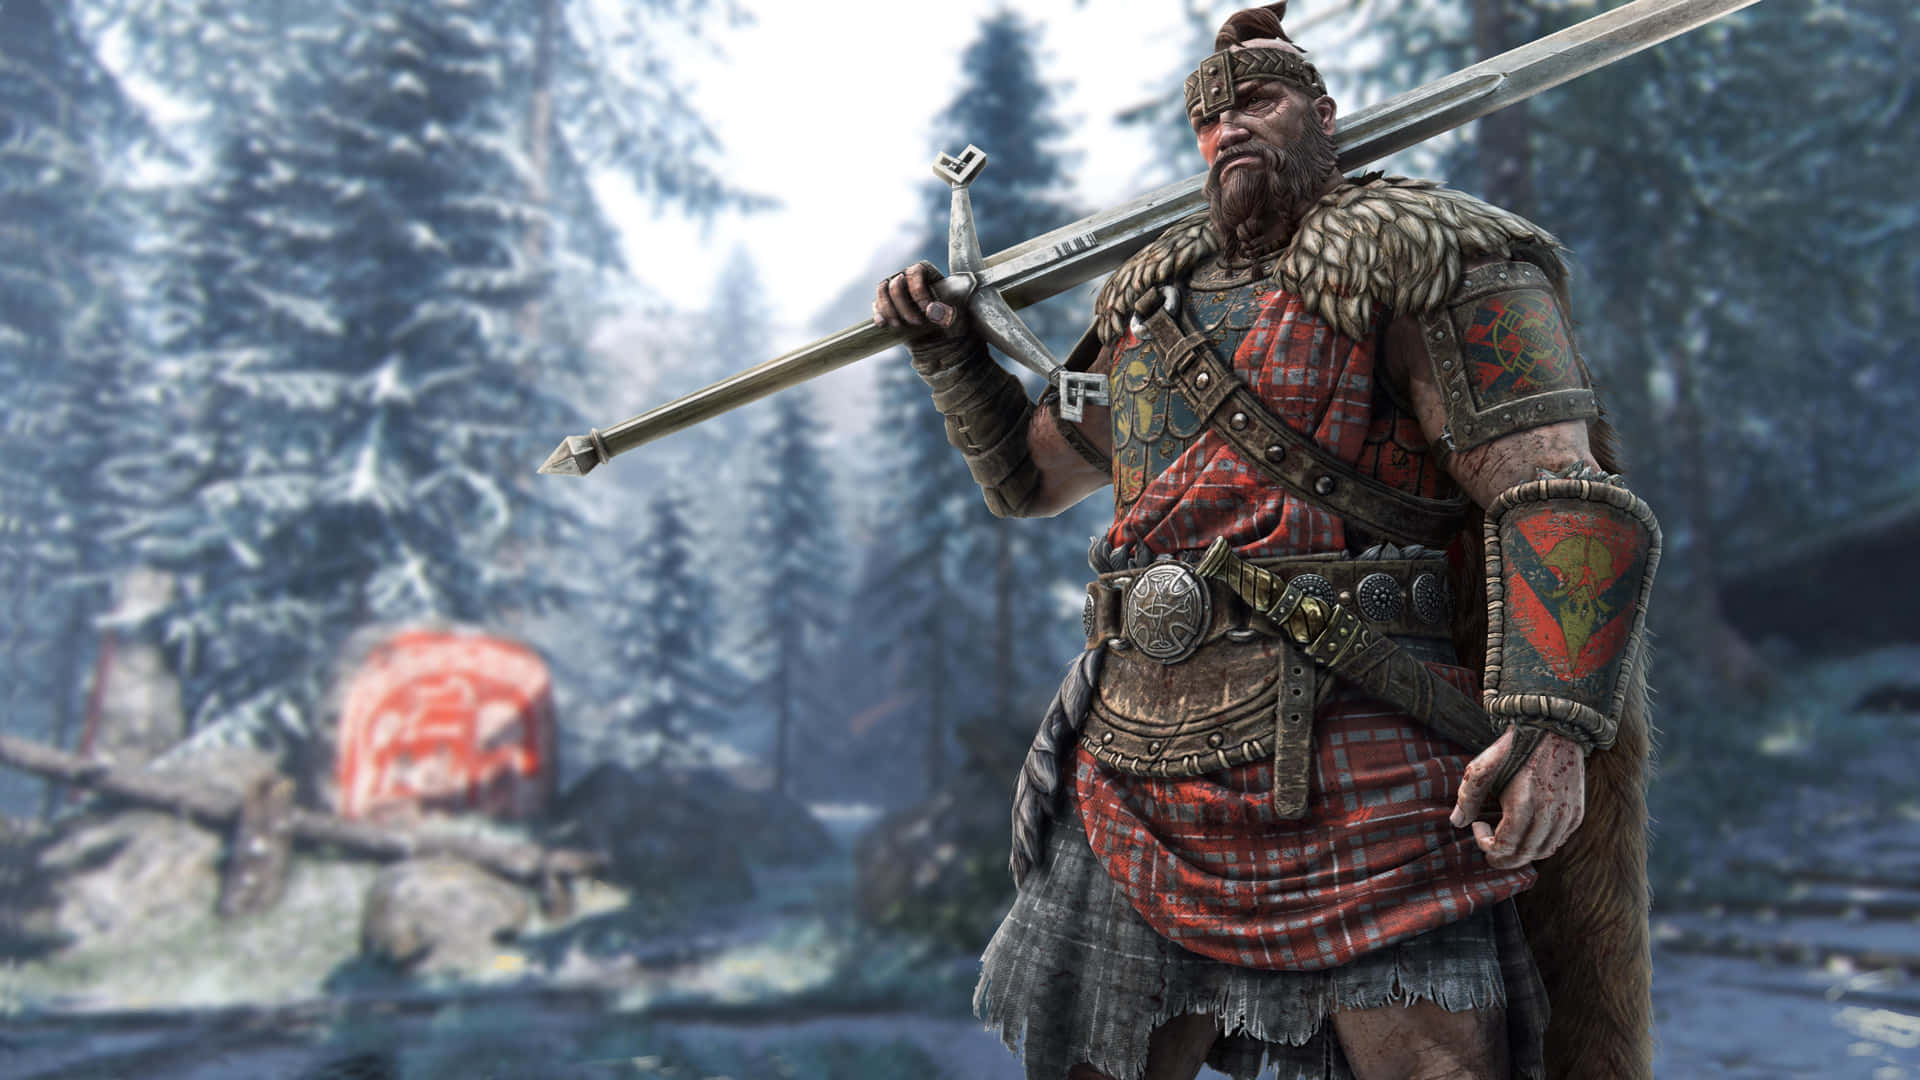 The Highlander, a feared warrior in the game For Honor Wallpaper